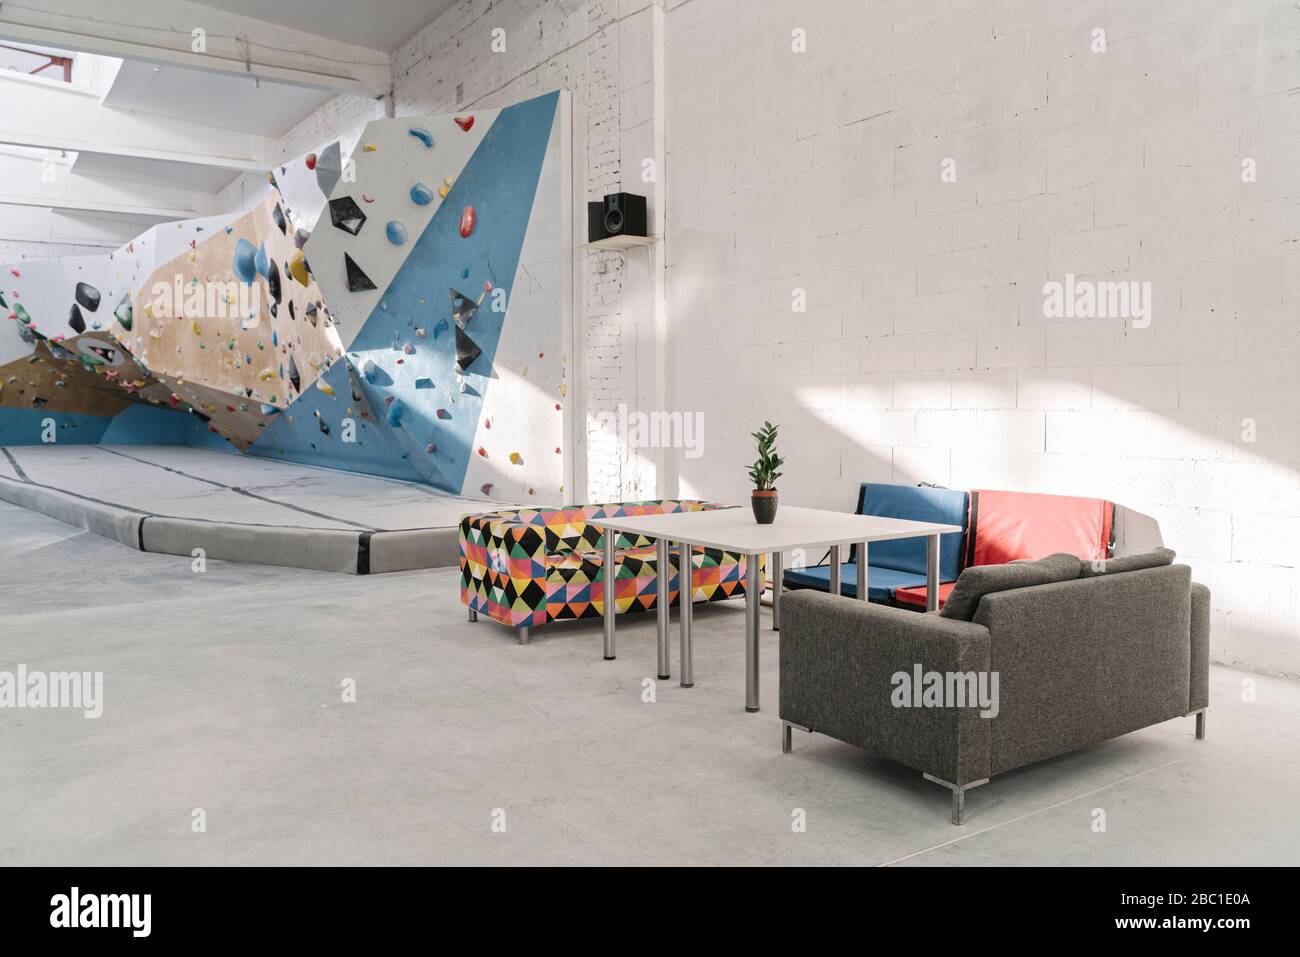 Lounge in a bouldering hall Stock Photo